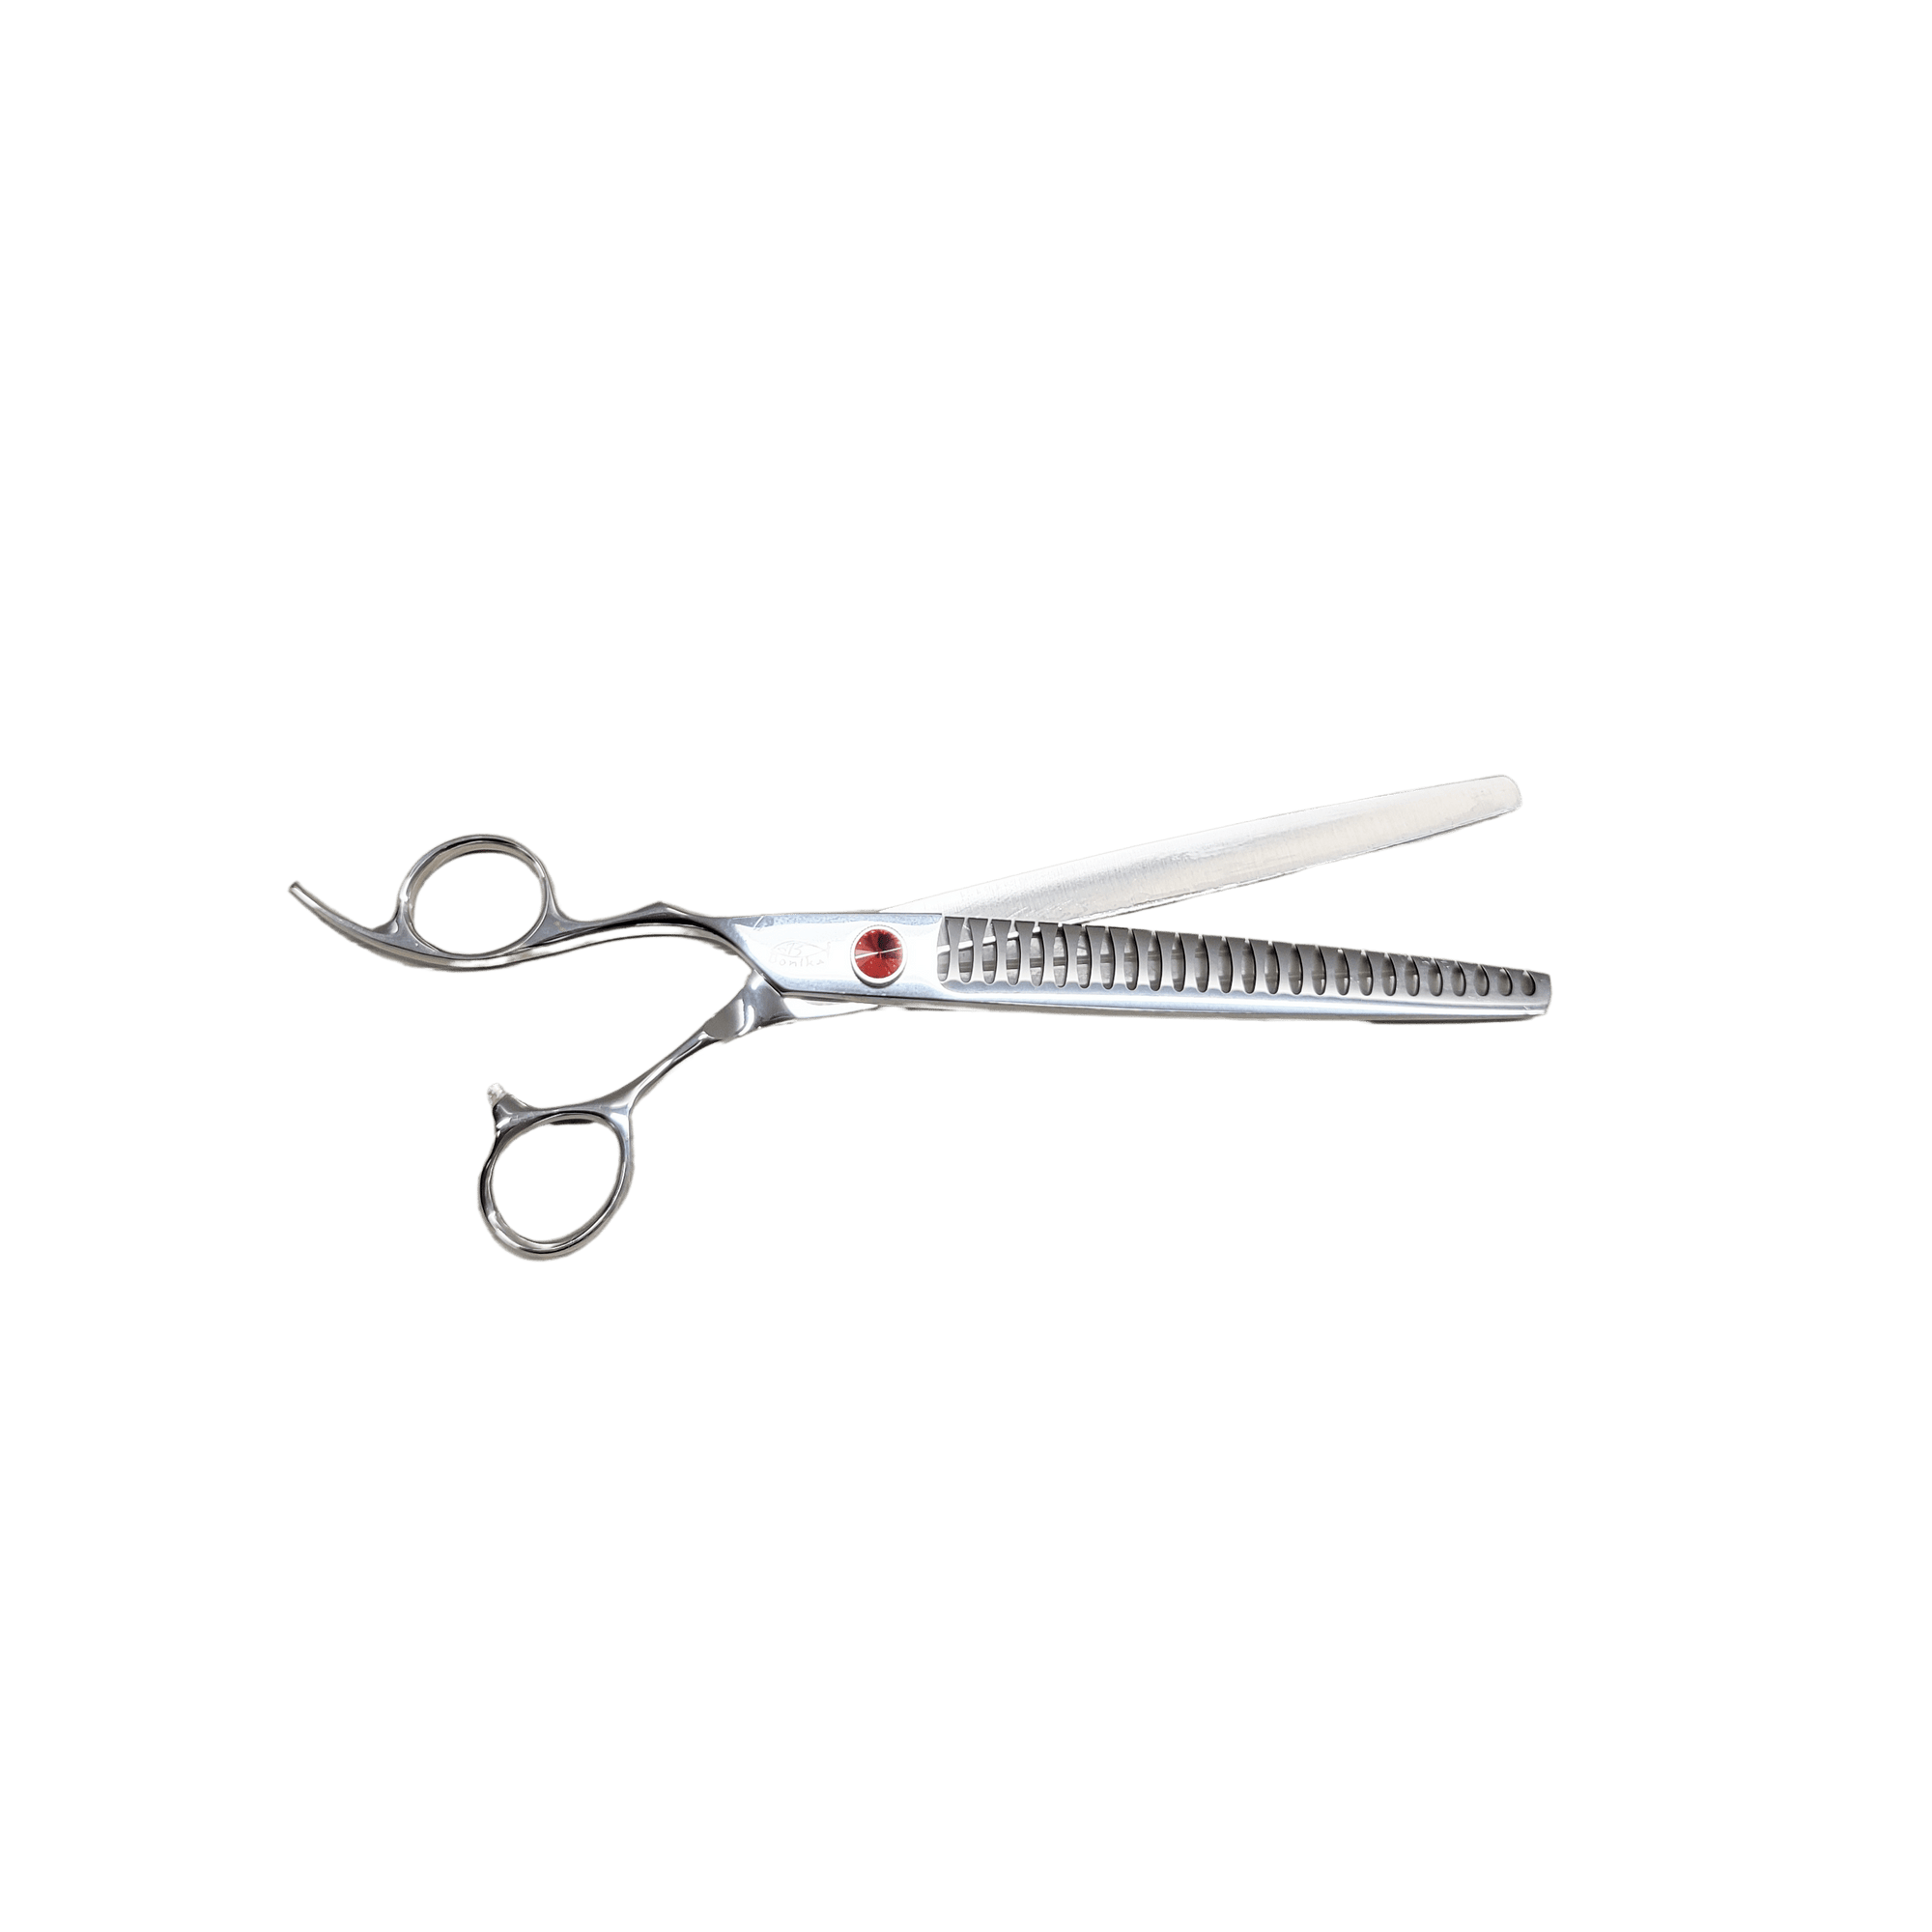 Big Red 8 inch, 28 tooth Texturizer Shear